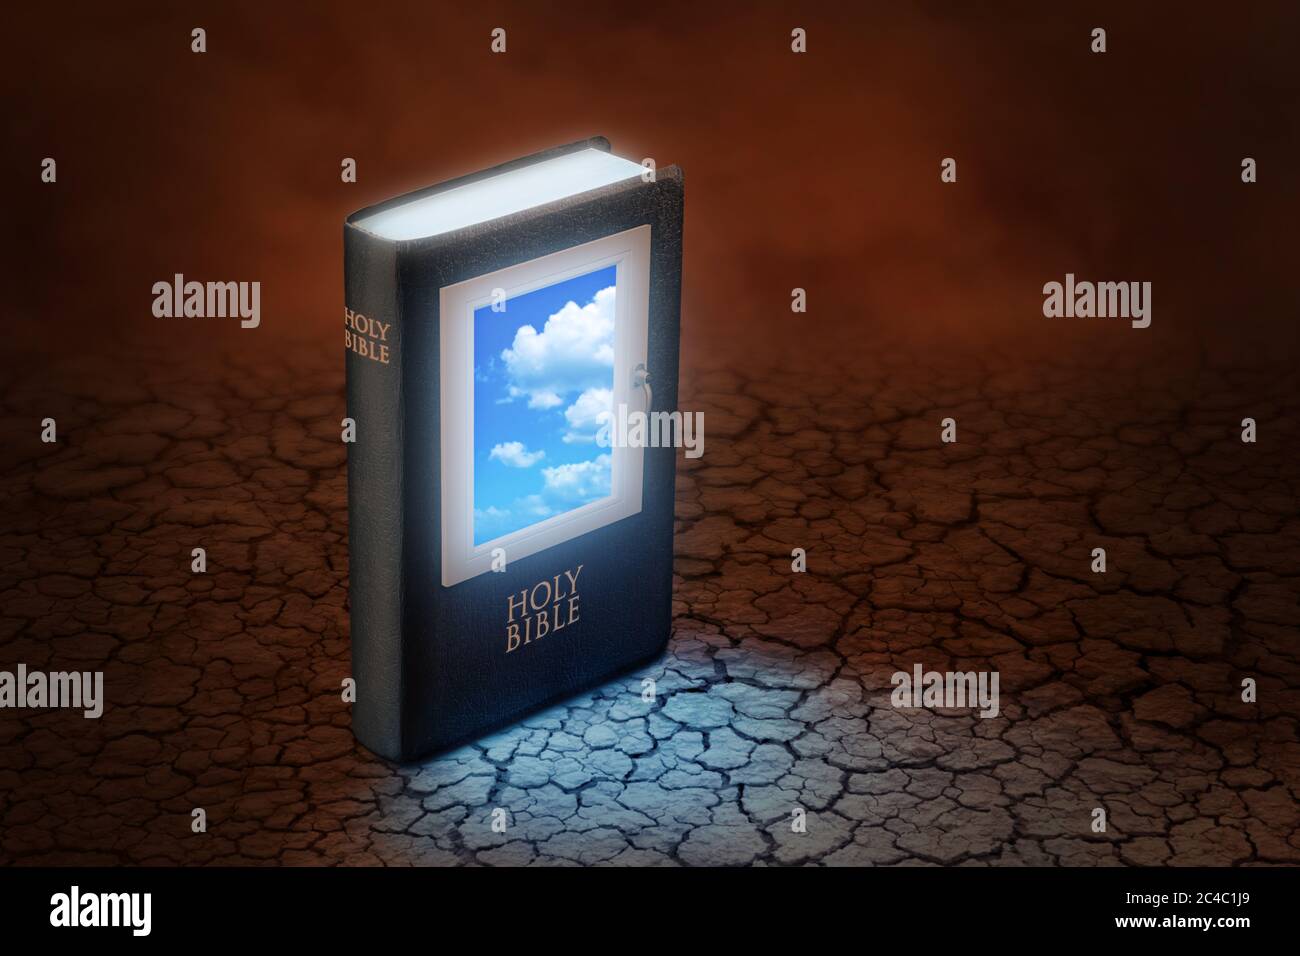 Holy Bible with a window on the cover through which blue sky can be seen, standing on a dry and cracked reddish earth. Concept about the Bible which i Stock Photo